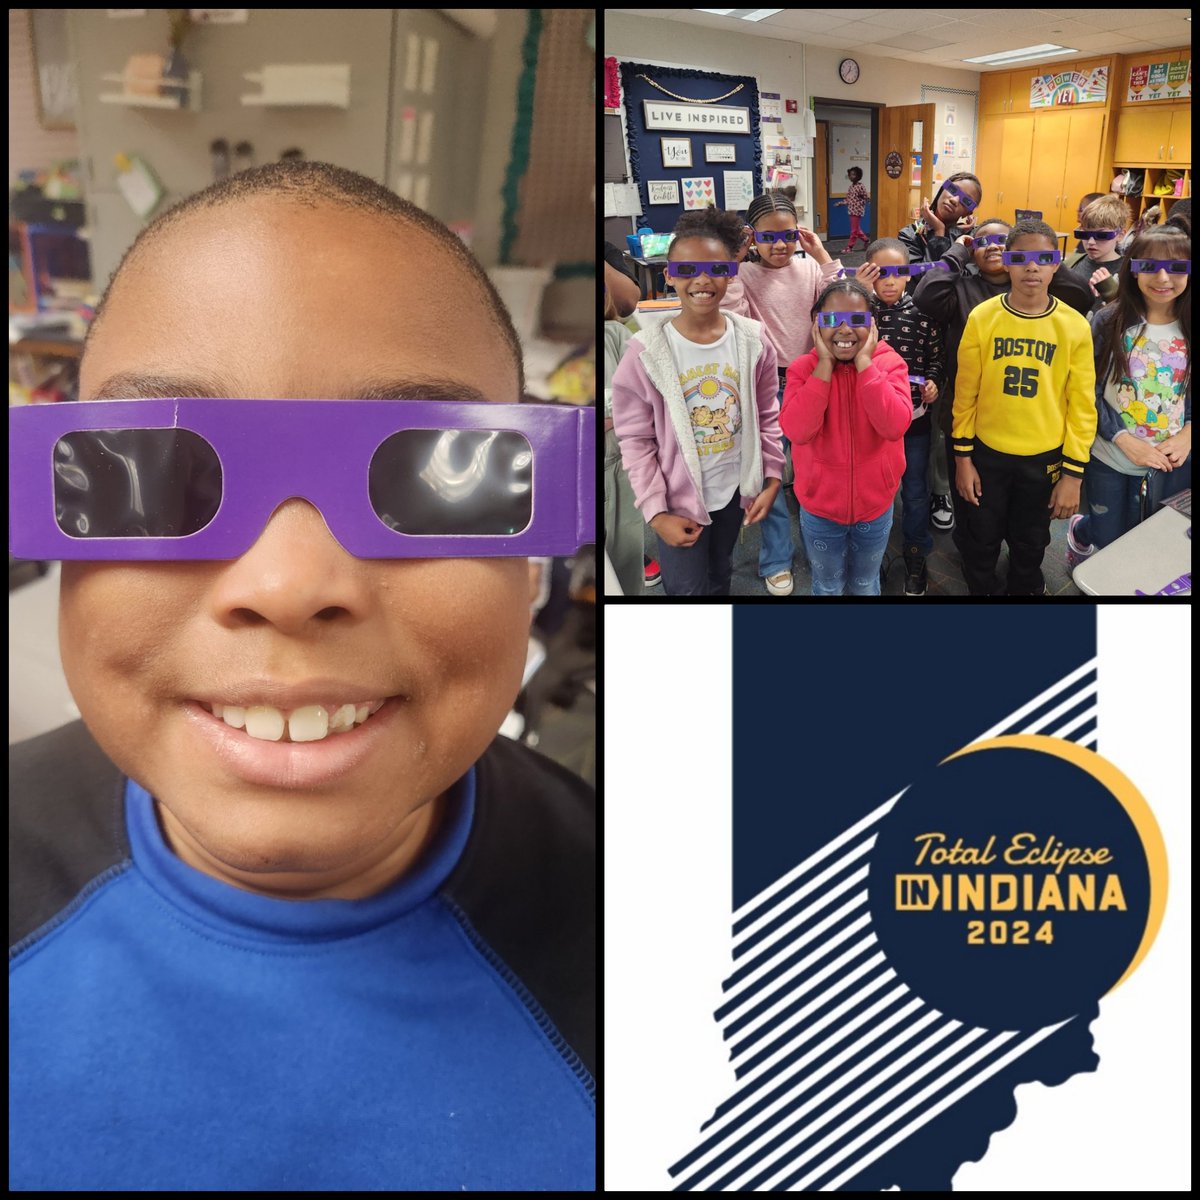 We are ready for the #SolarEclipse2024 @CWChamps #wearewayne